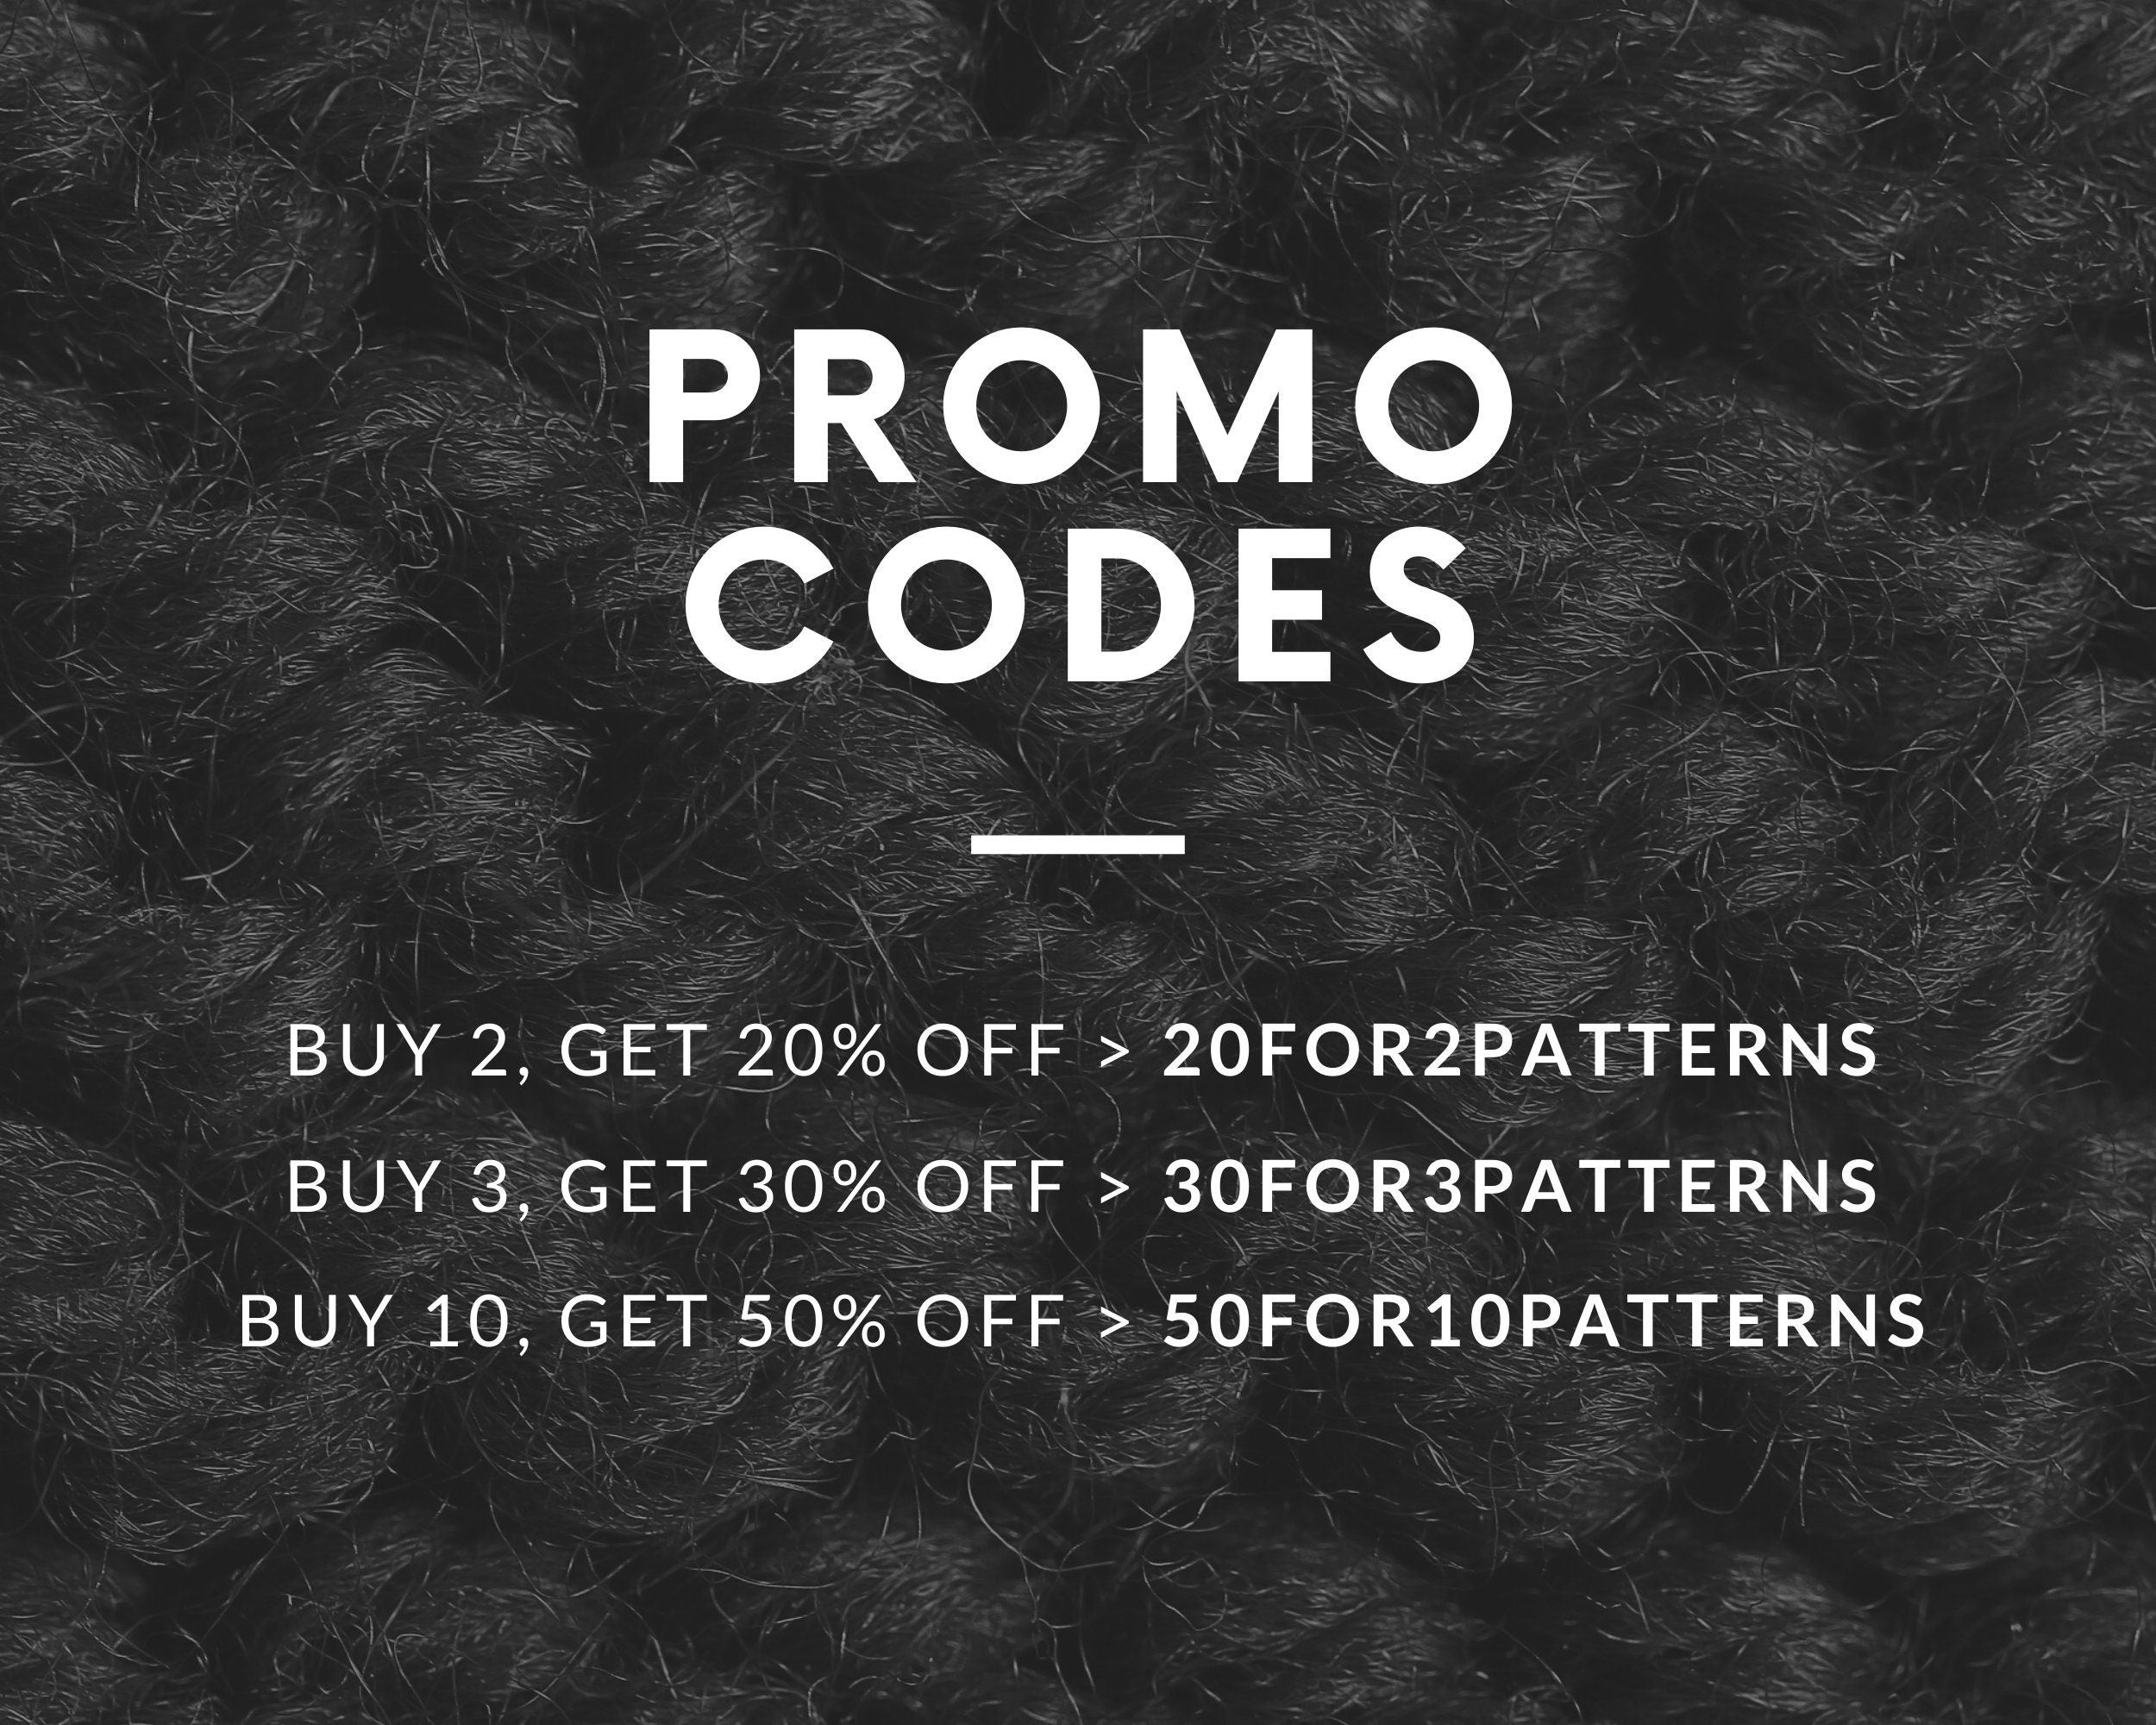 Portero Coupon Code - How to use Promo Codes and Coupons for